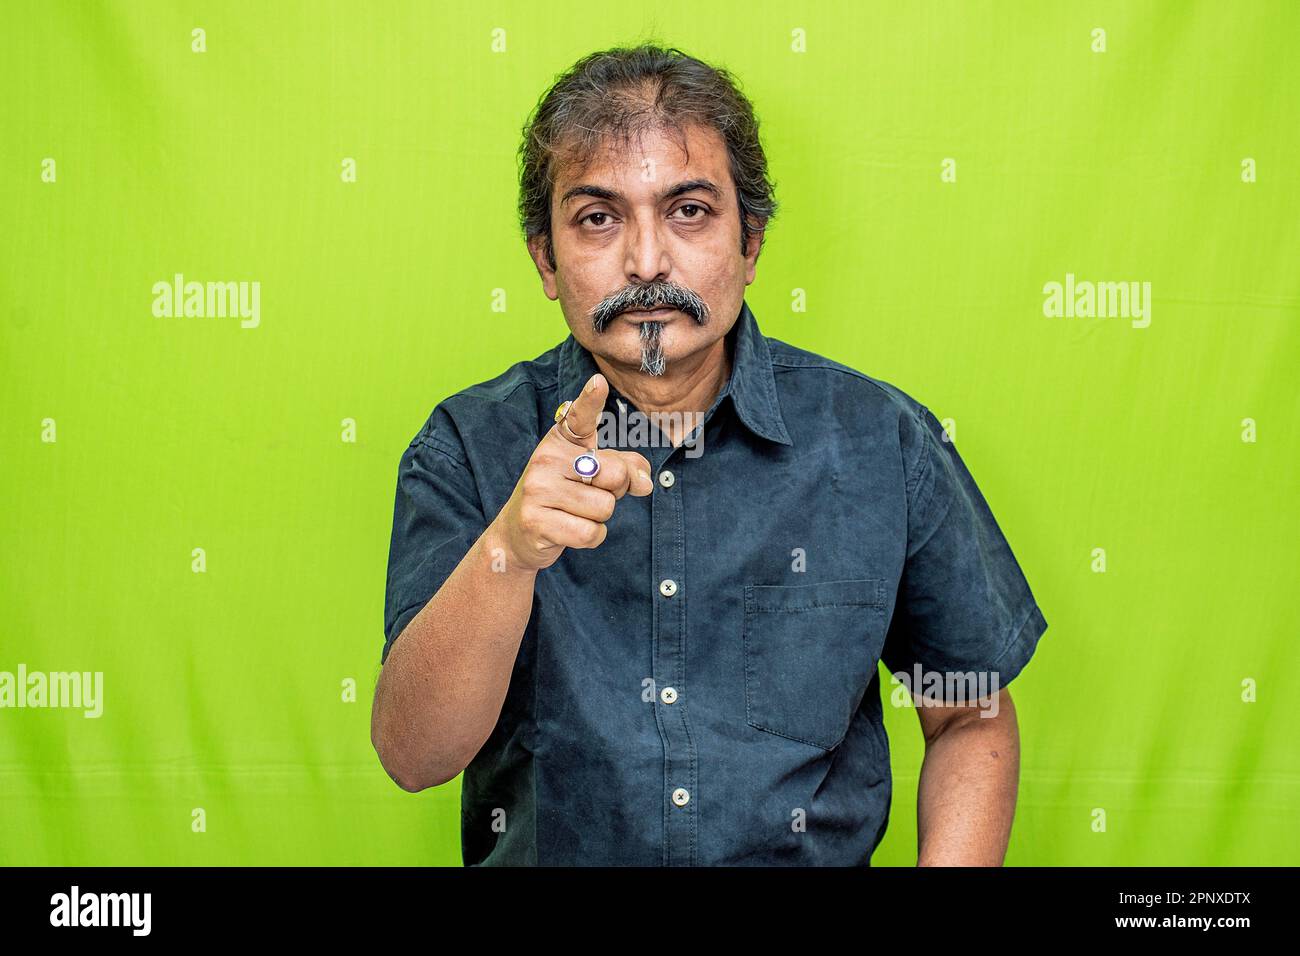 Confidently standing against a green screen, a smart corporate businessman in a black shirt points forward with his right hand, exuding professionalism Stock Photo